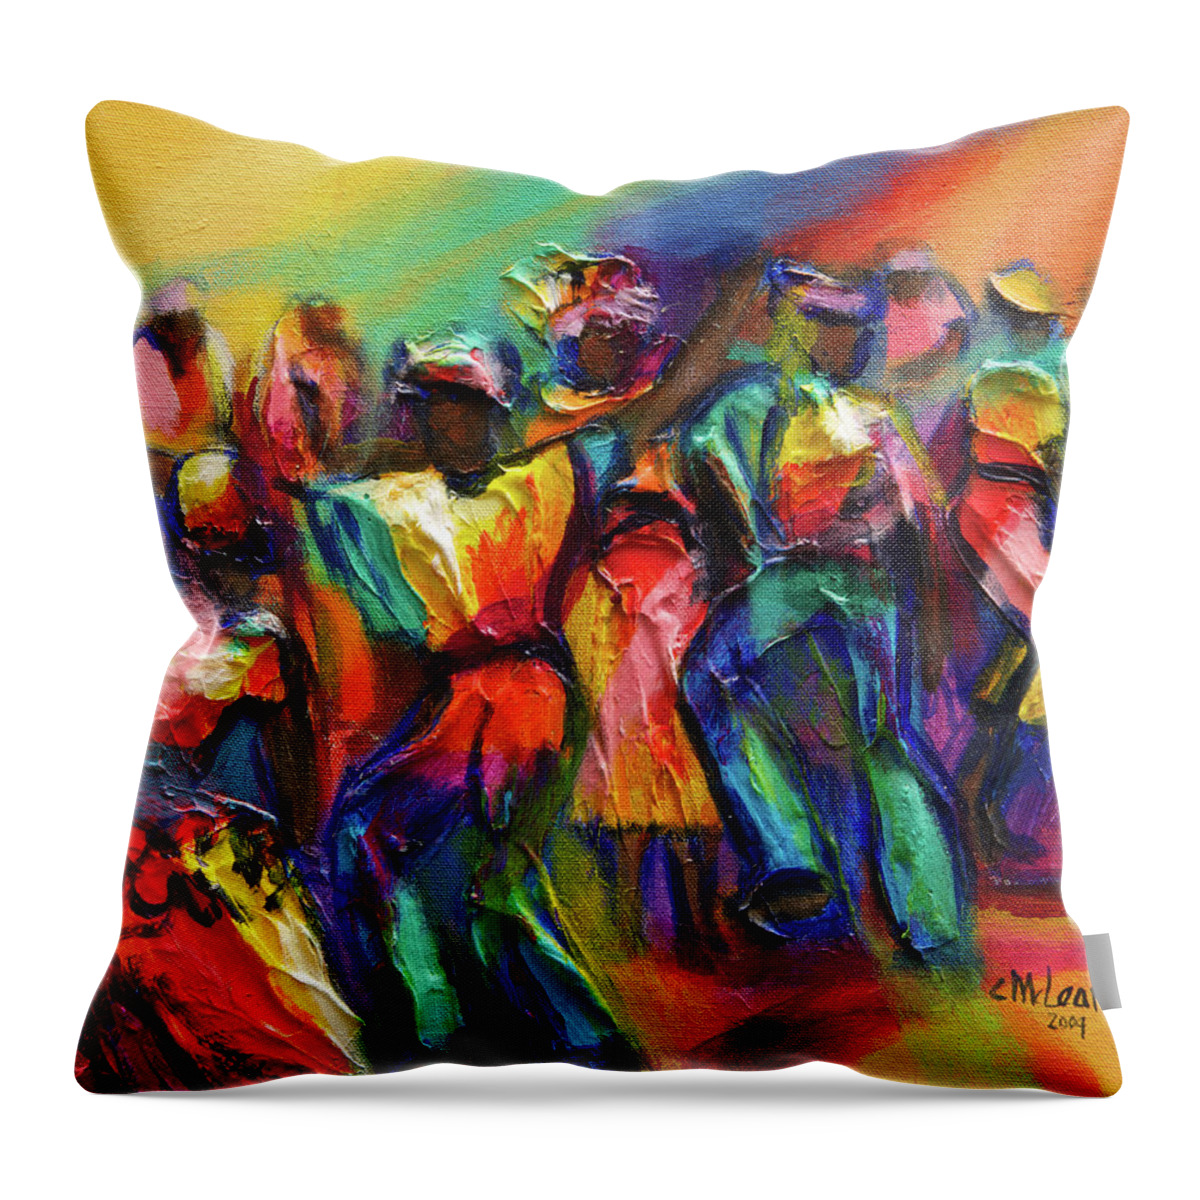 Beau Belle Throw Pillow featuring the painting Beau Yelle - Sweet Man by Cynthia McLean